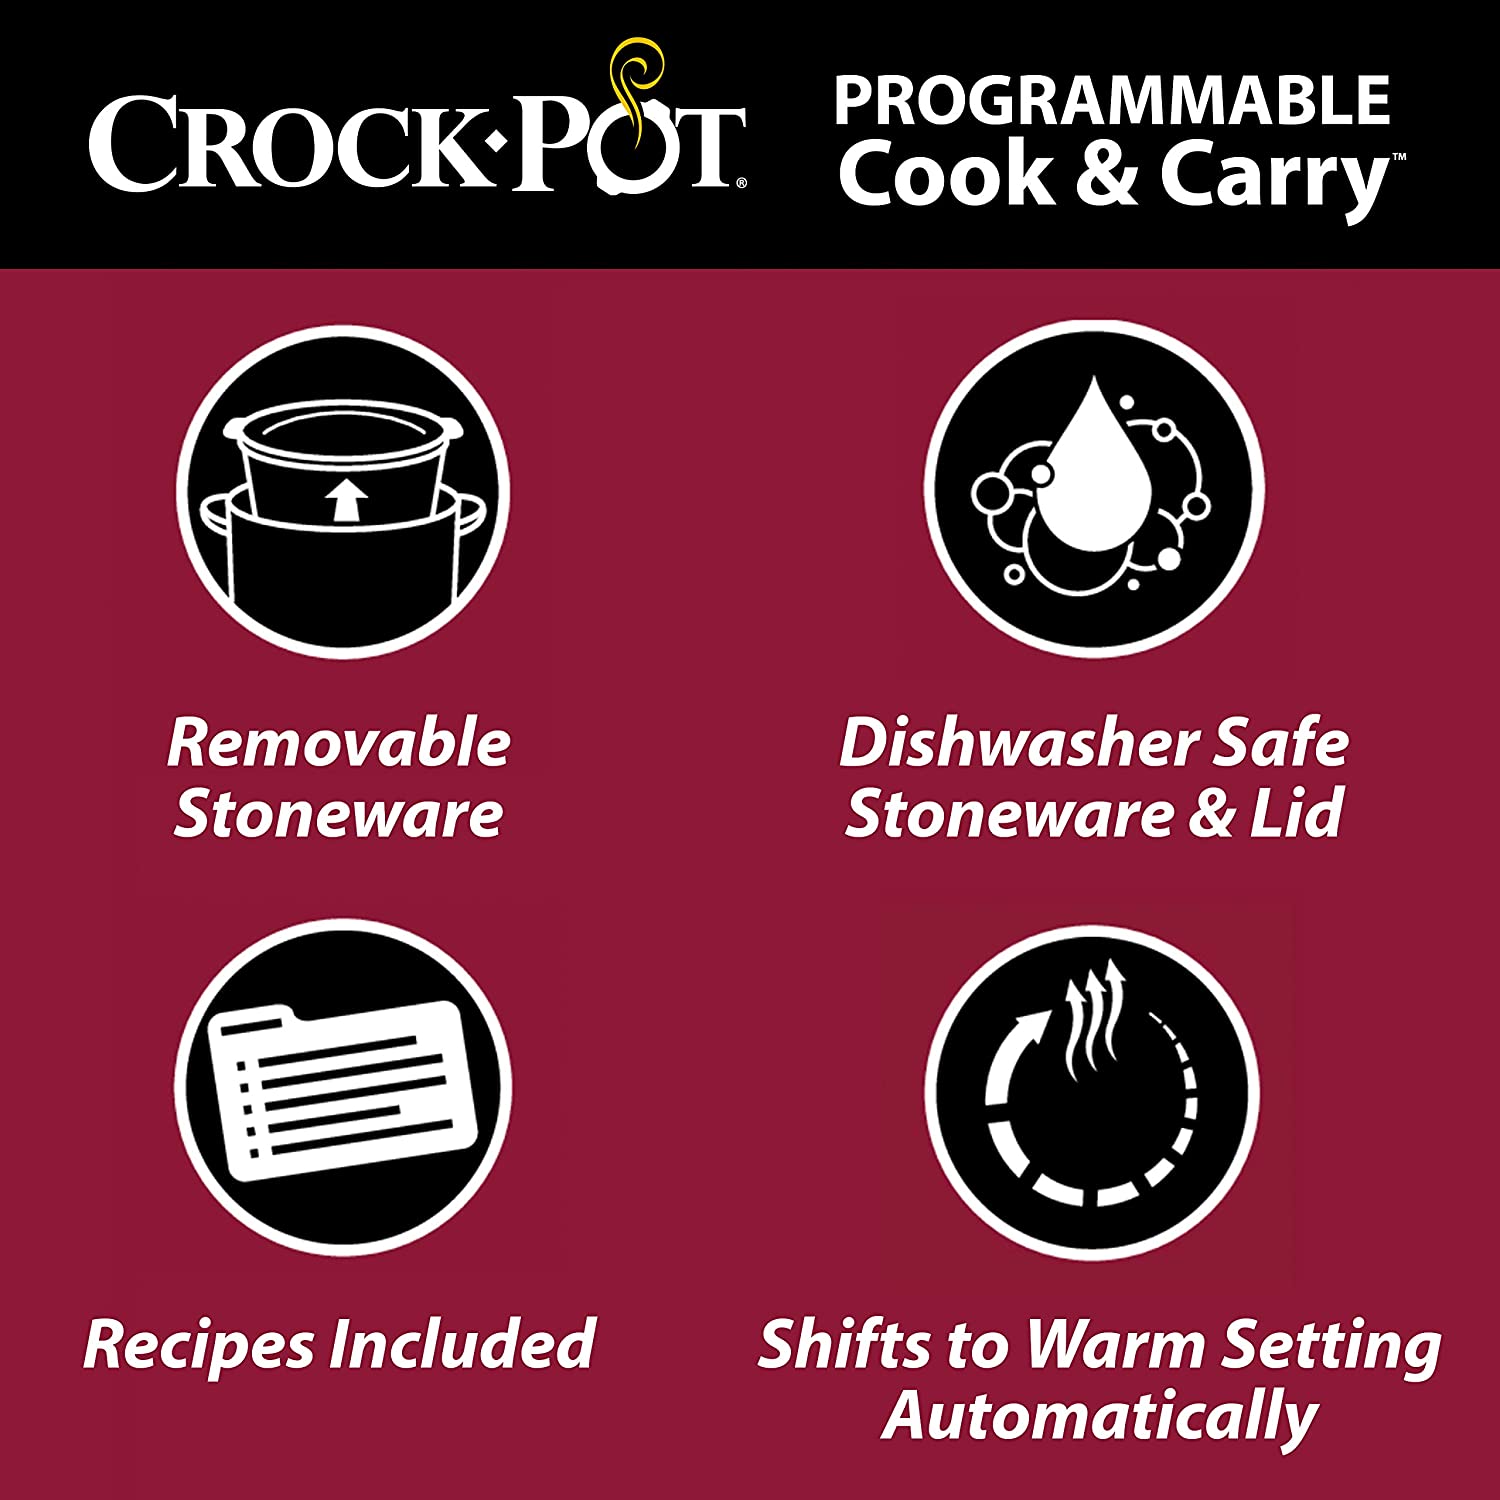 https://discounttoday.net/wp-content/uploads/2022/11/Crock-Pot-SCCPVL610-S-A-6-Quart-Cook-Carry-Programmable-Slow-Cooker-with-Digital-Timer-Stainless-Steel5.jpg